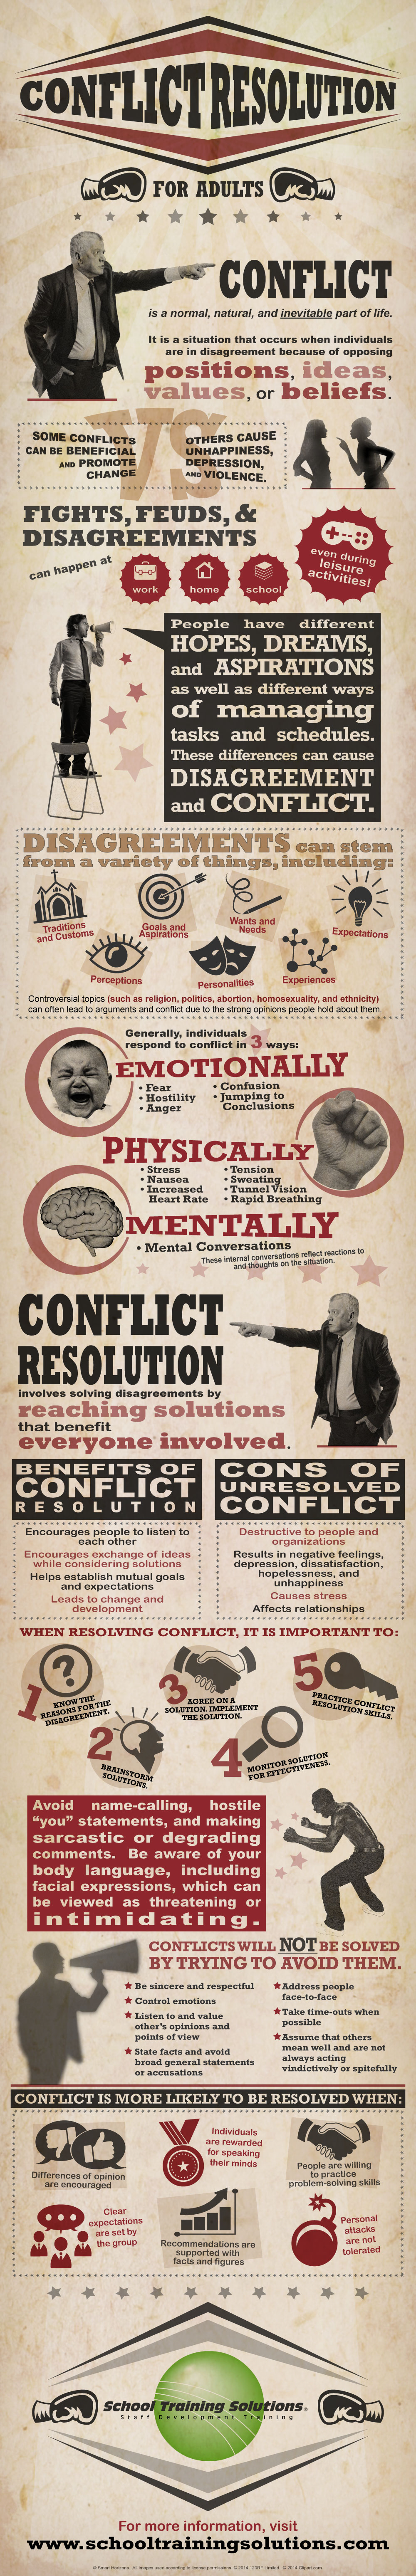 Conflict Resolution Infographic